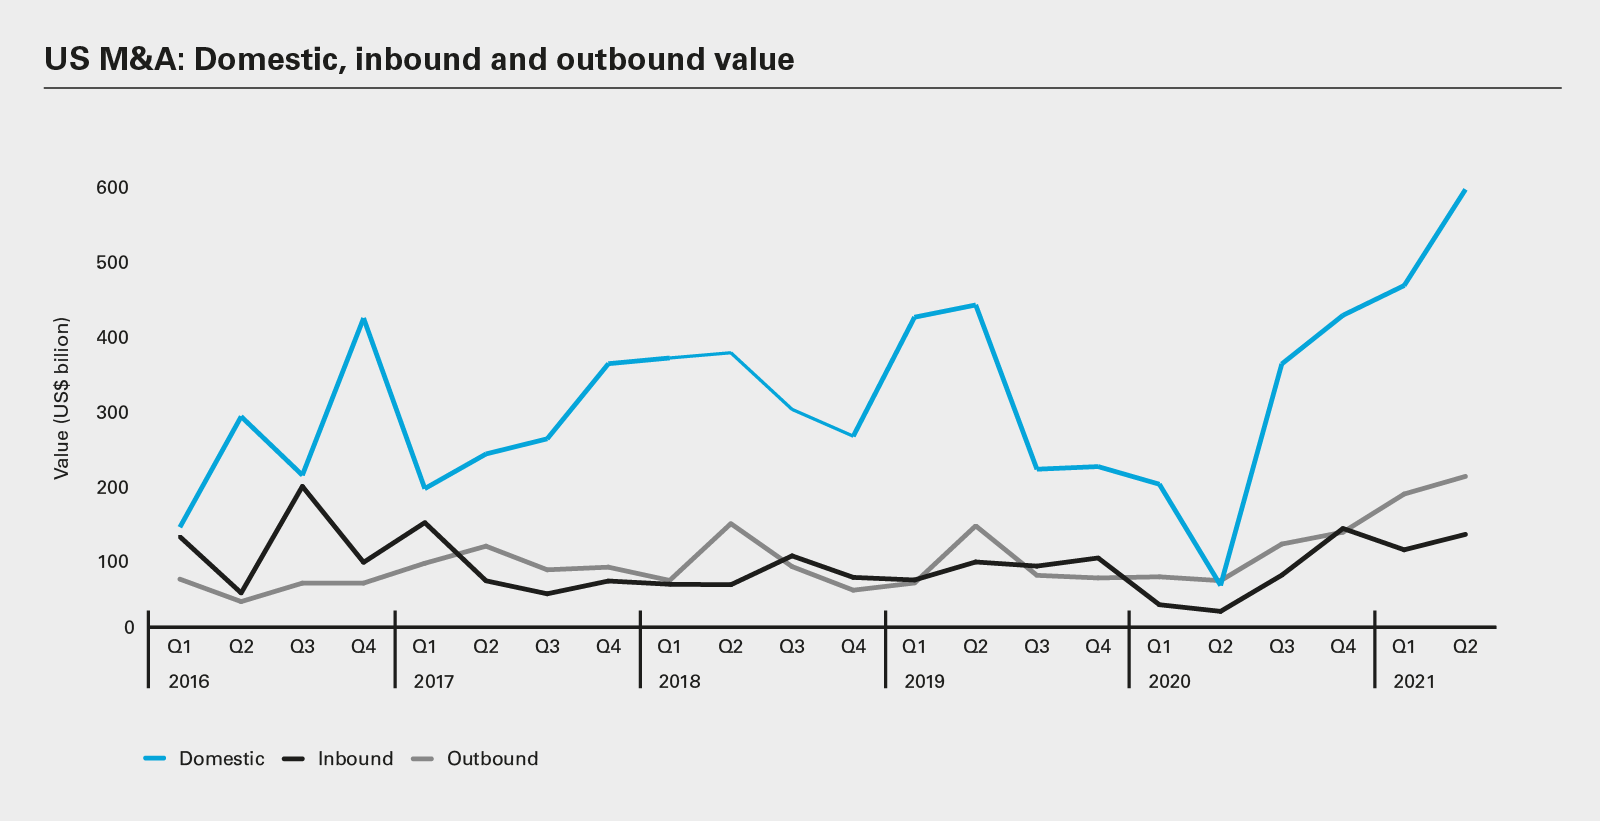 US M&A: Domestic, inbound and outbound value